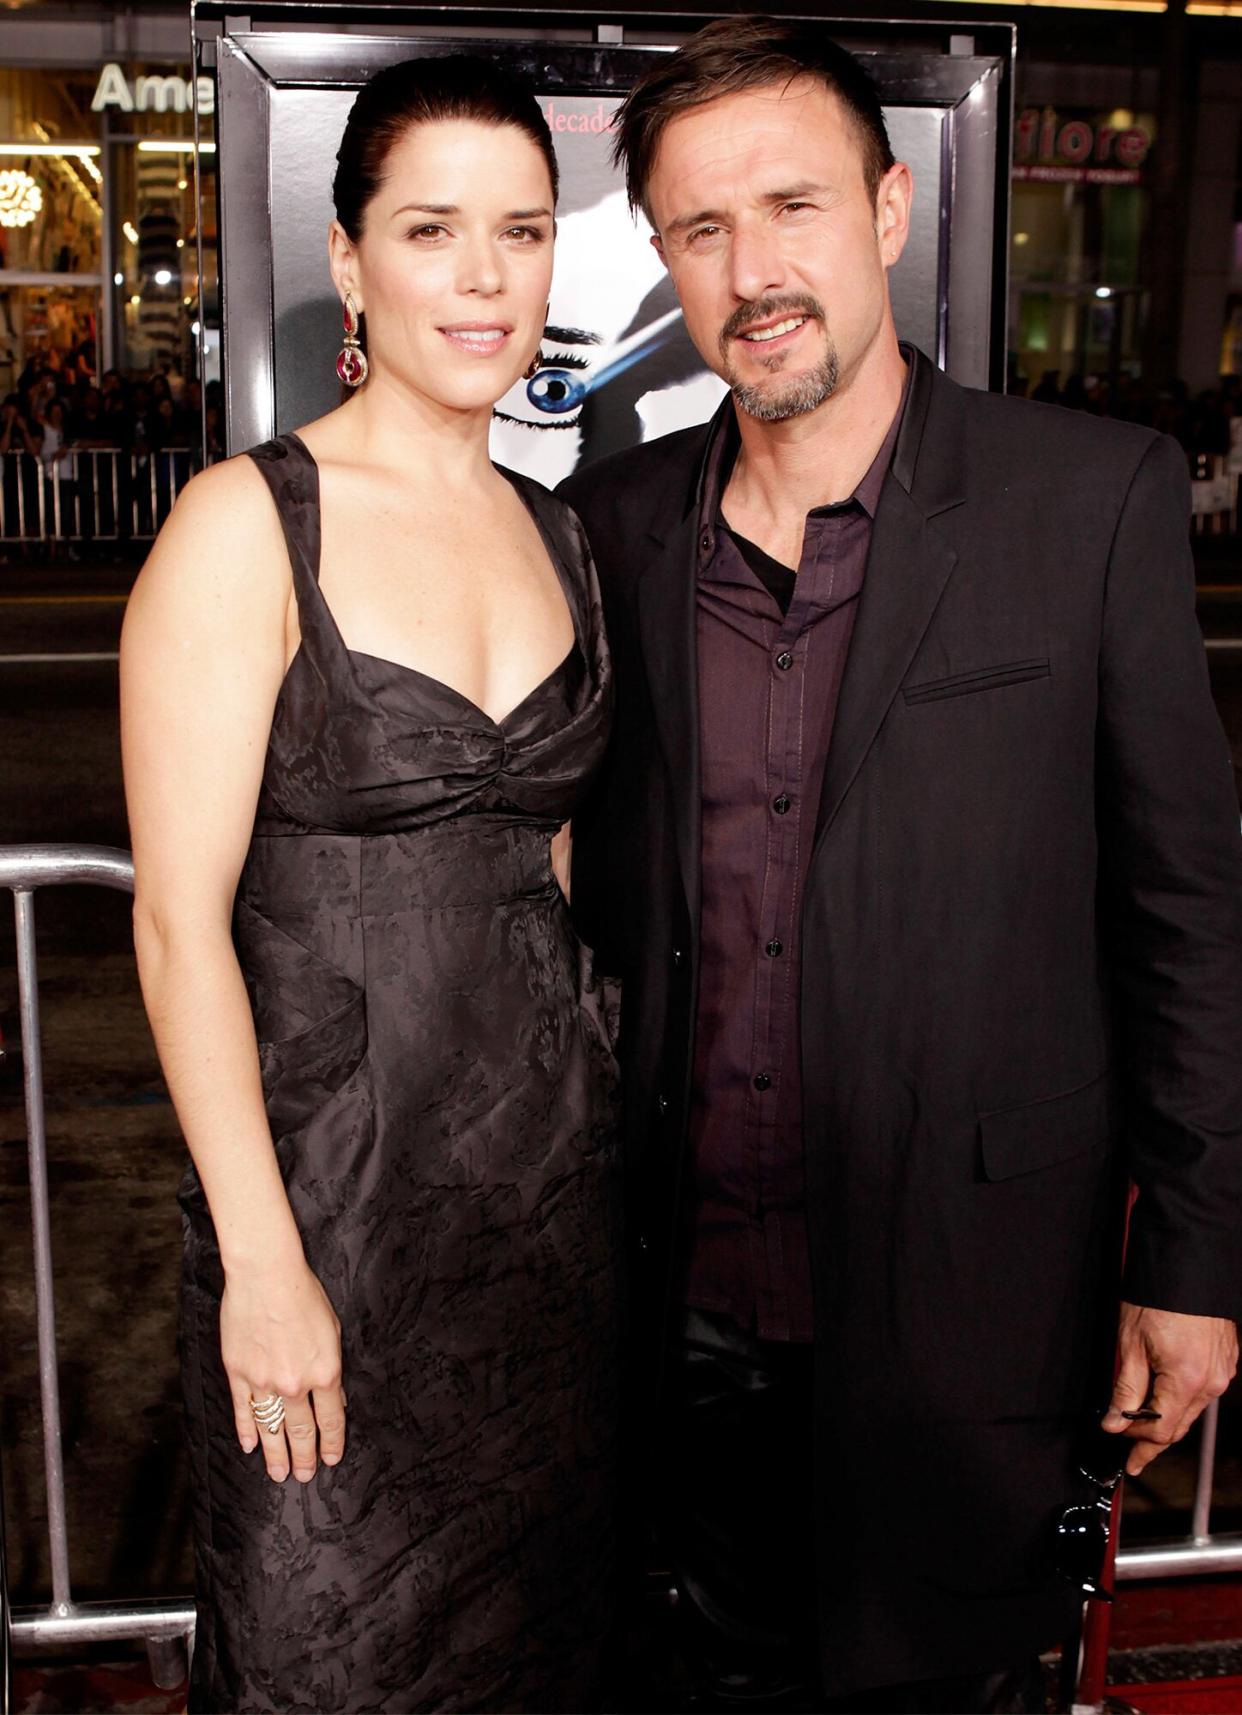 Neve Campbell (L) and David Arquette arrive at the "Scream 4" World Premiere at Grauman's Chinese Theatre on April 11, 2011 in Hollywood, California